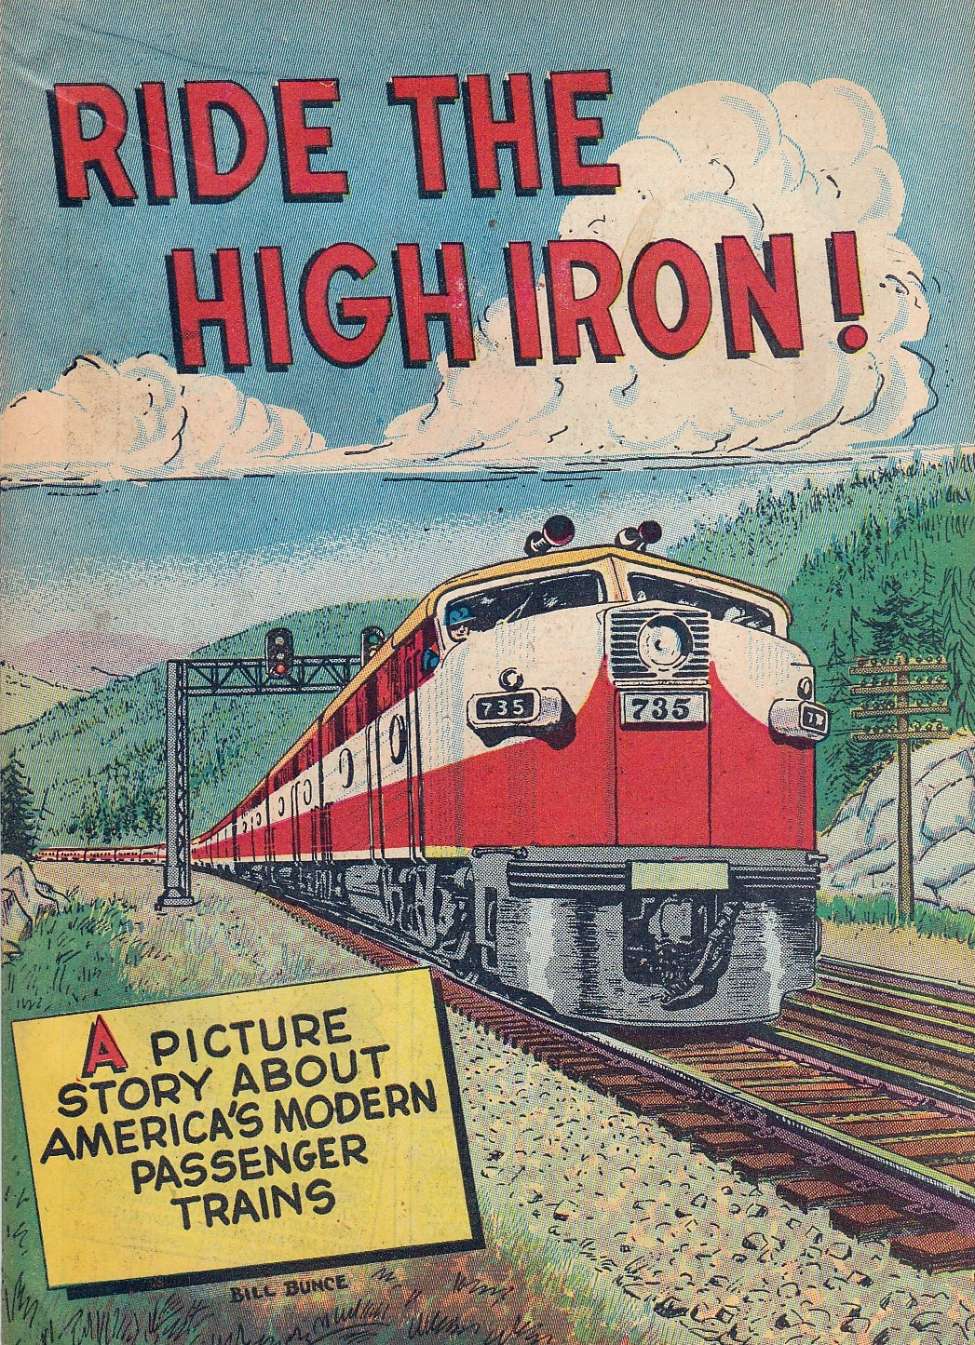 Comic Book Cover For Ride The High Iron!